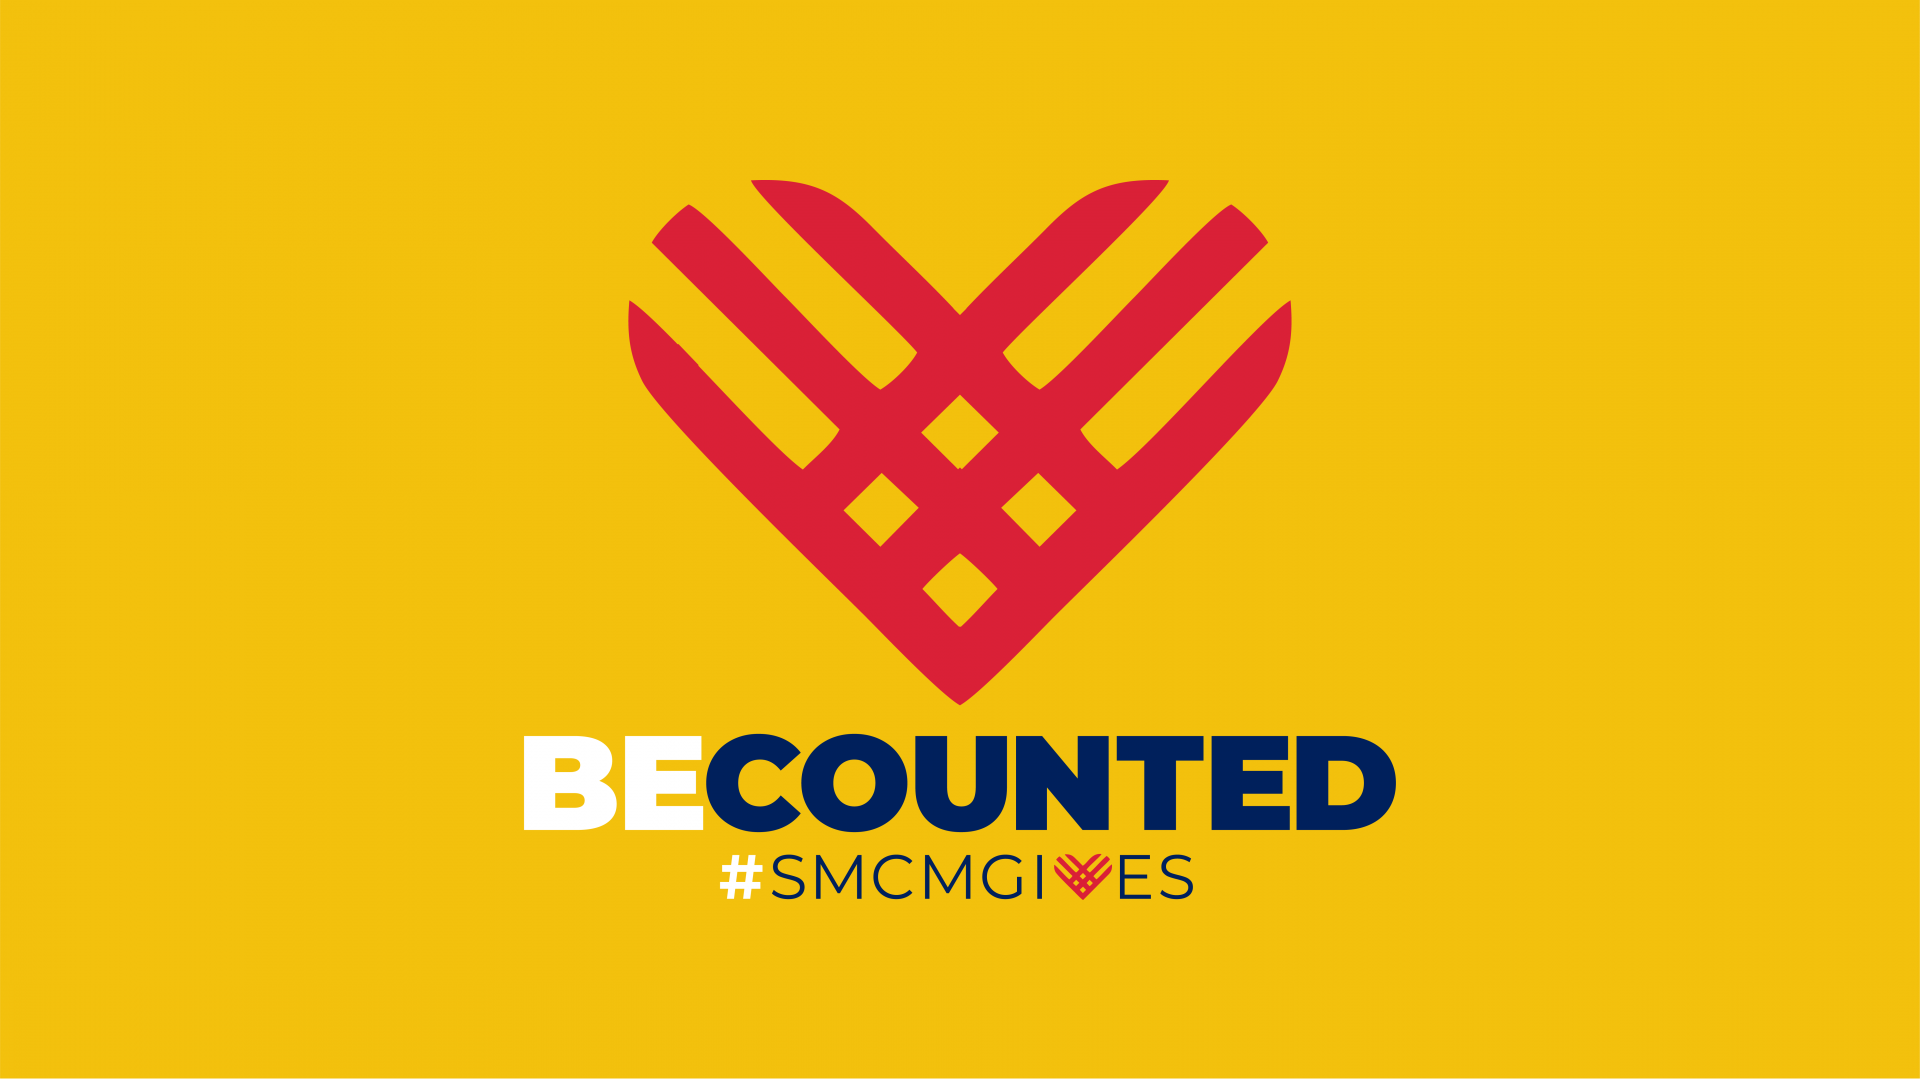 Becounted #smcmgives 